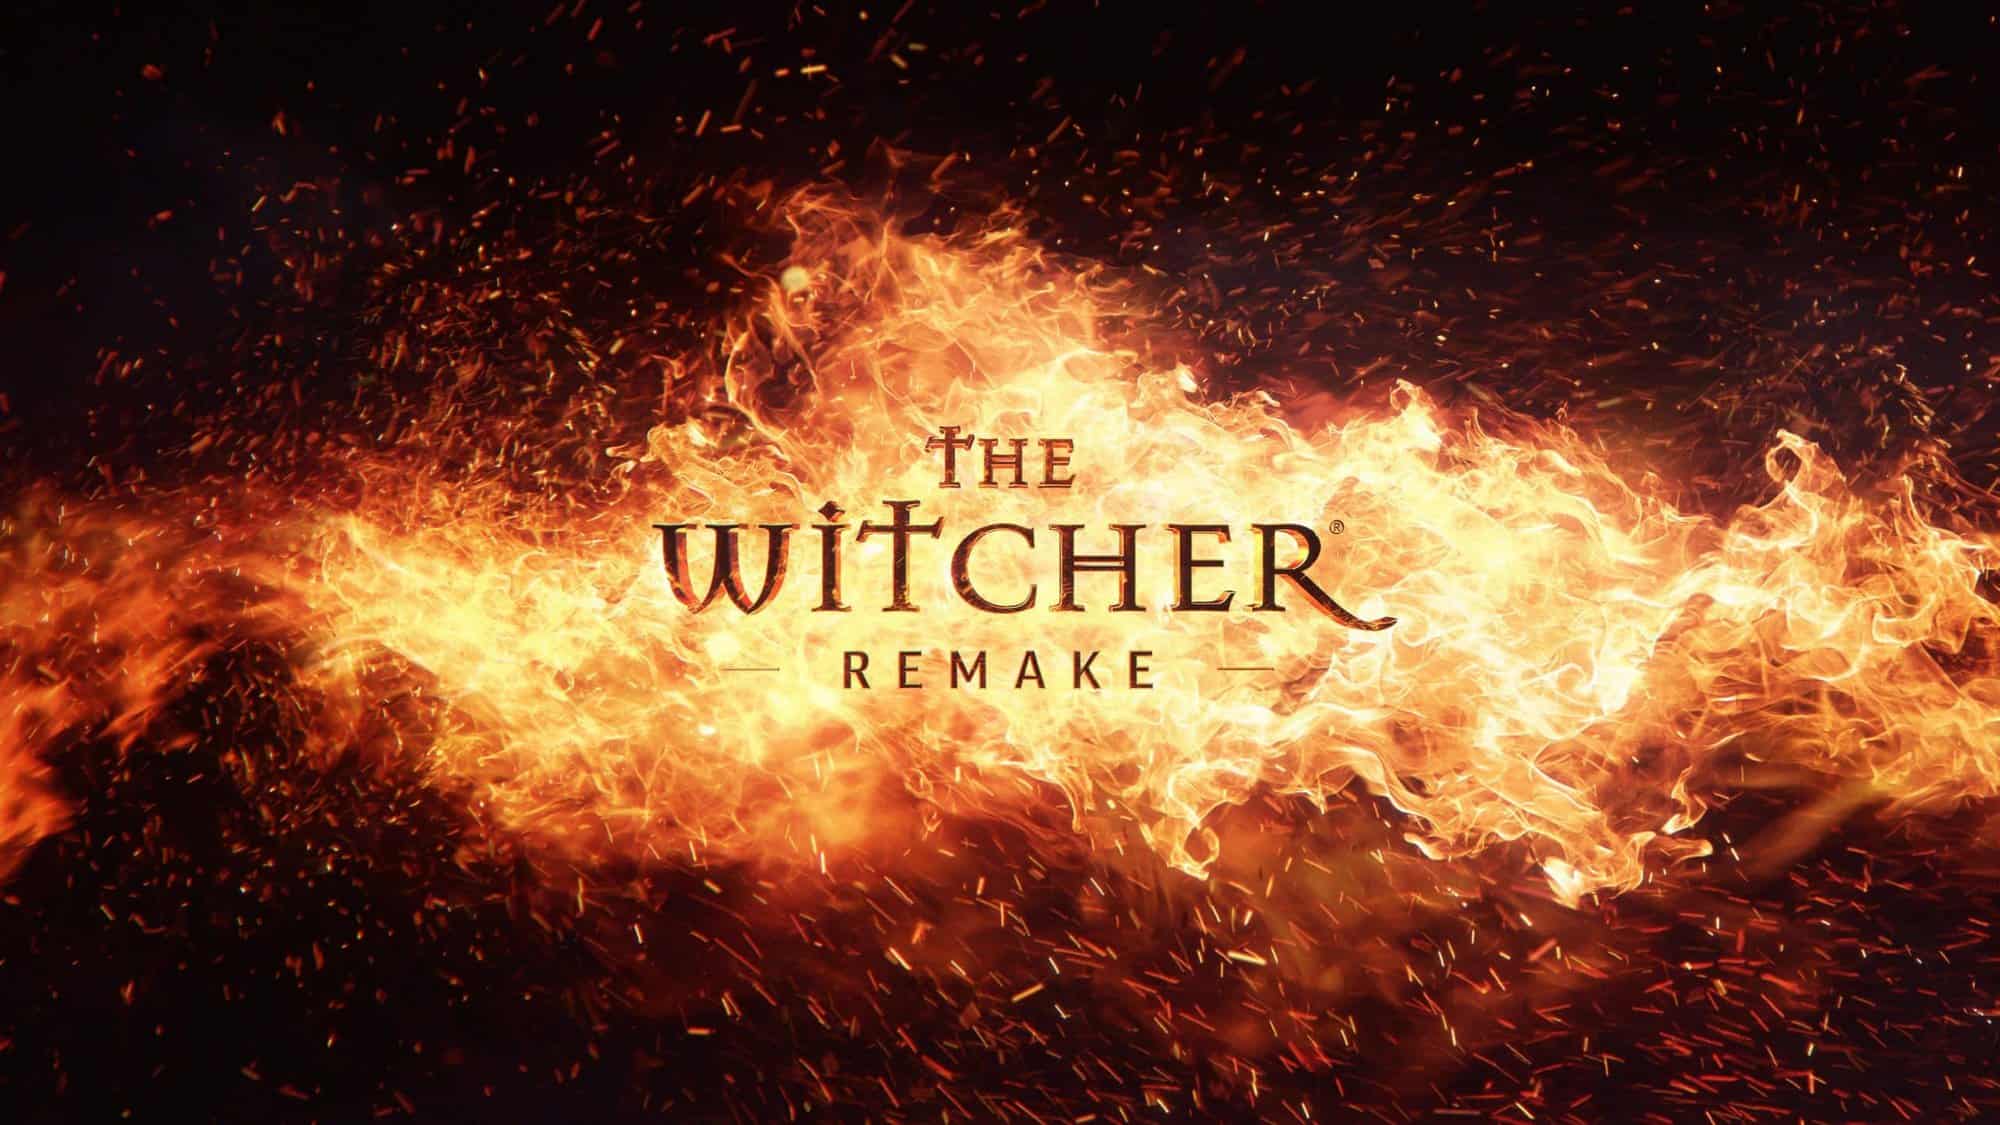 CD Project Red anuncia remake de The Witcher